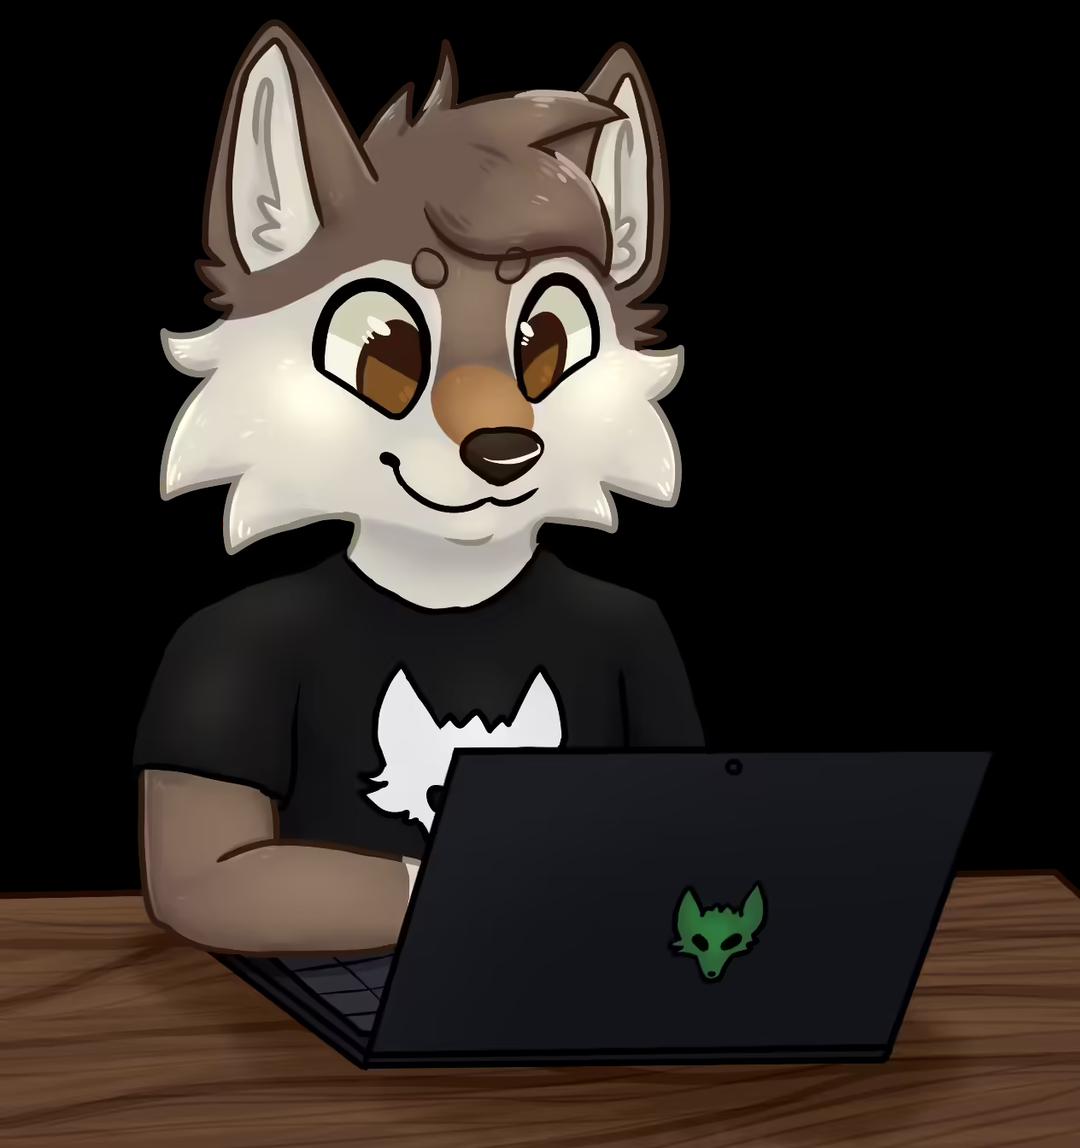 A wolf with a furway t-shirt typing on a black laptop